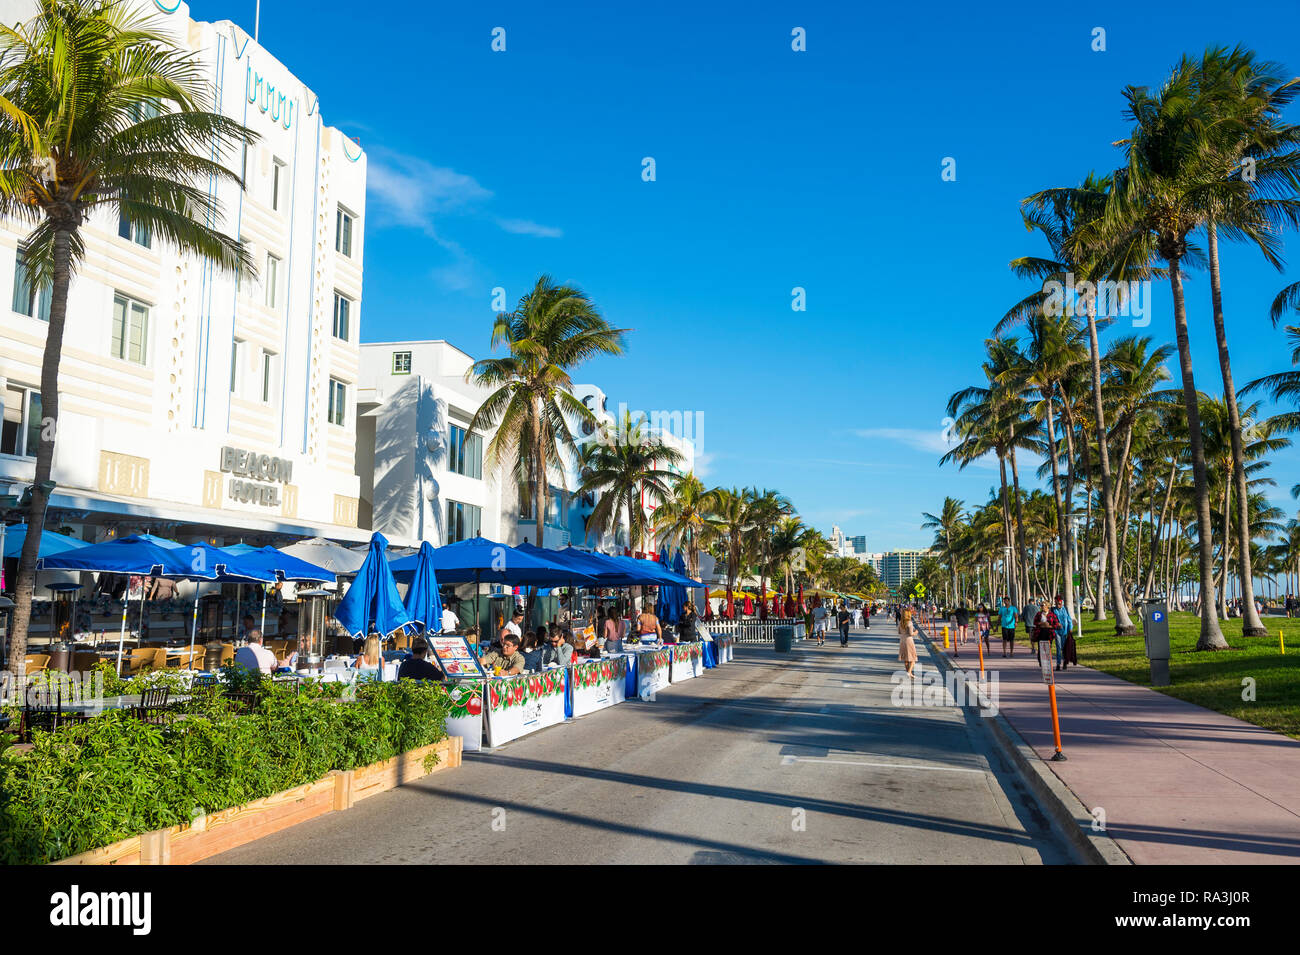 MIAMI - JANUARY, 2018: Sidewalk cafes expand onto the street when the Ocean Drive tourist strip is closed to traffic during New Year holidays. Stock Photo